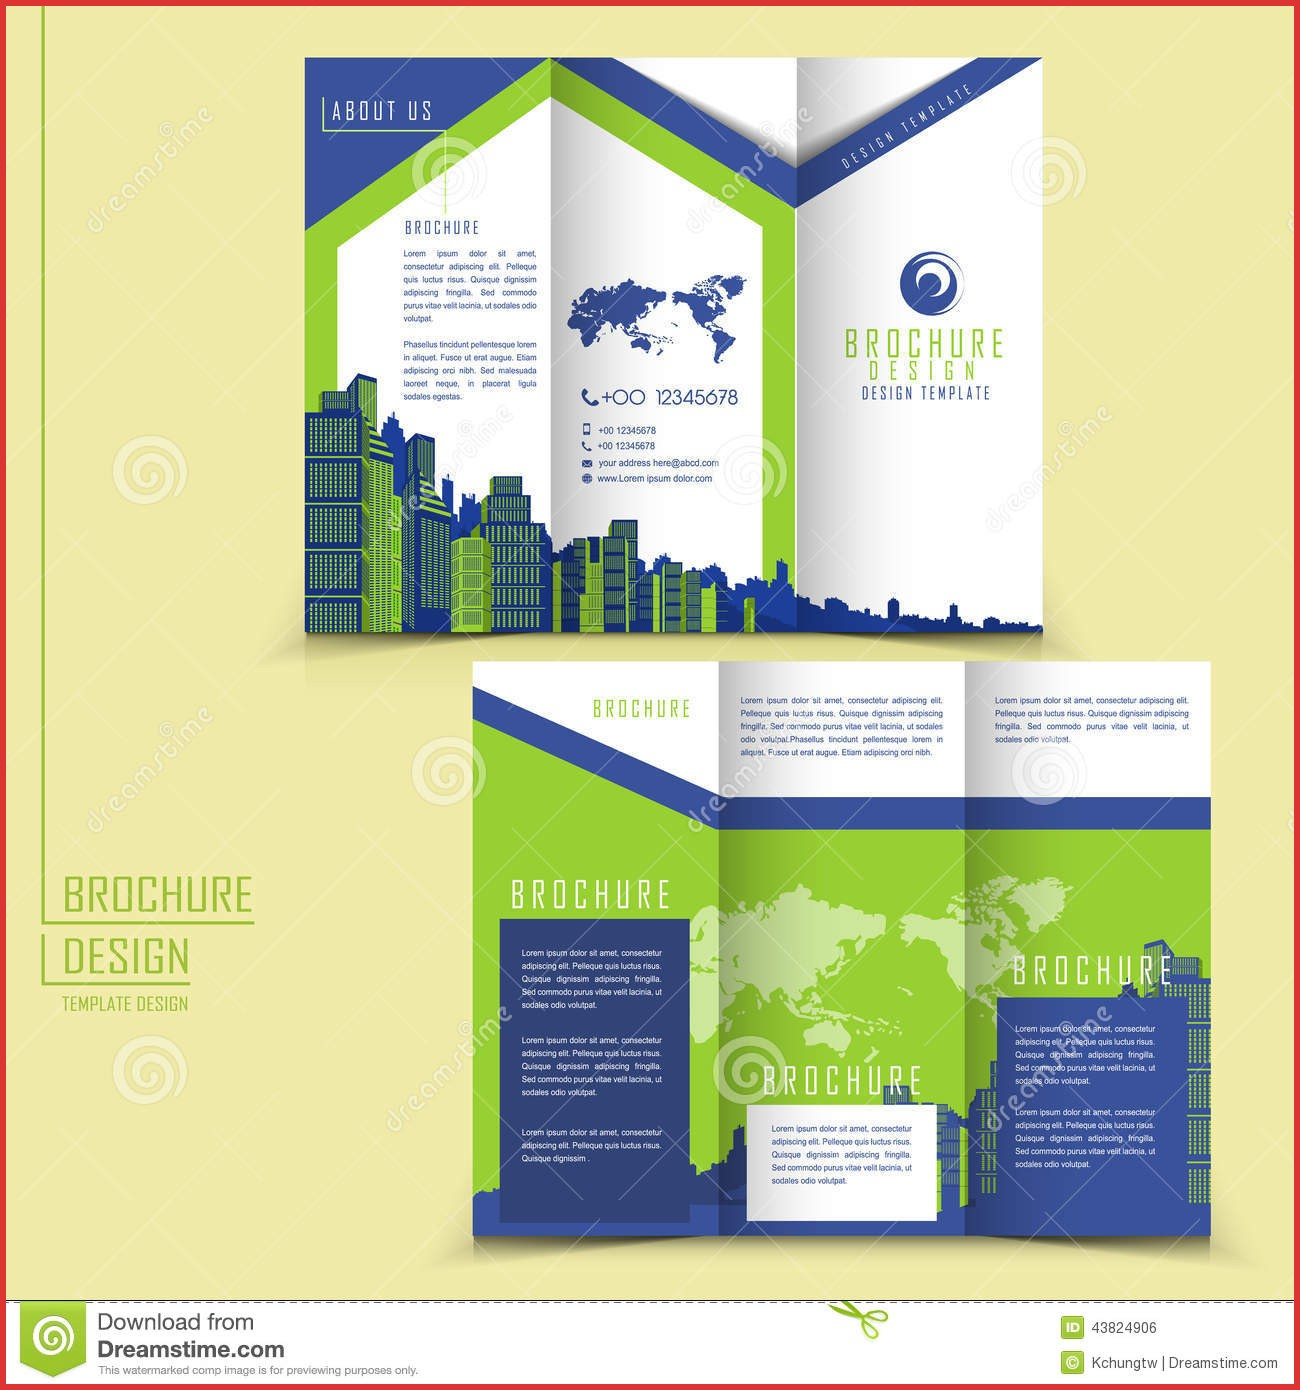 Beautiful 3 Fold Pamphlet Template | Job Latter With Regard To 3 Fold Brochure Template Free Download